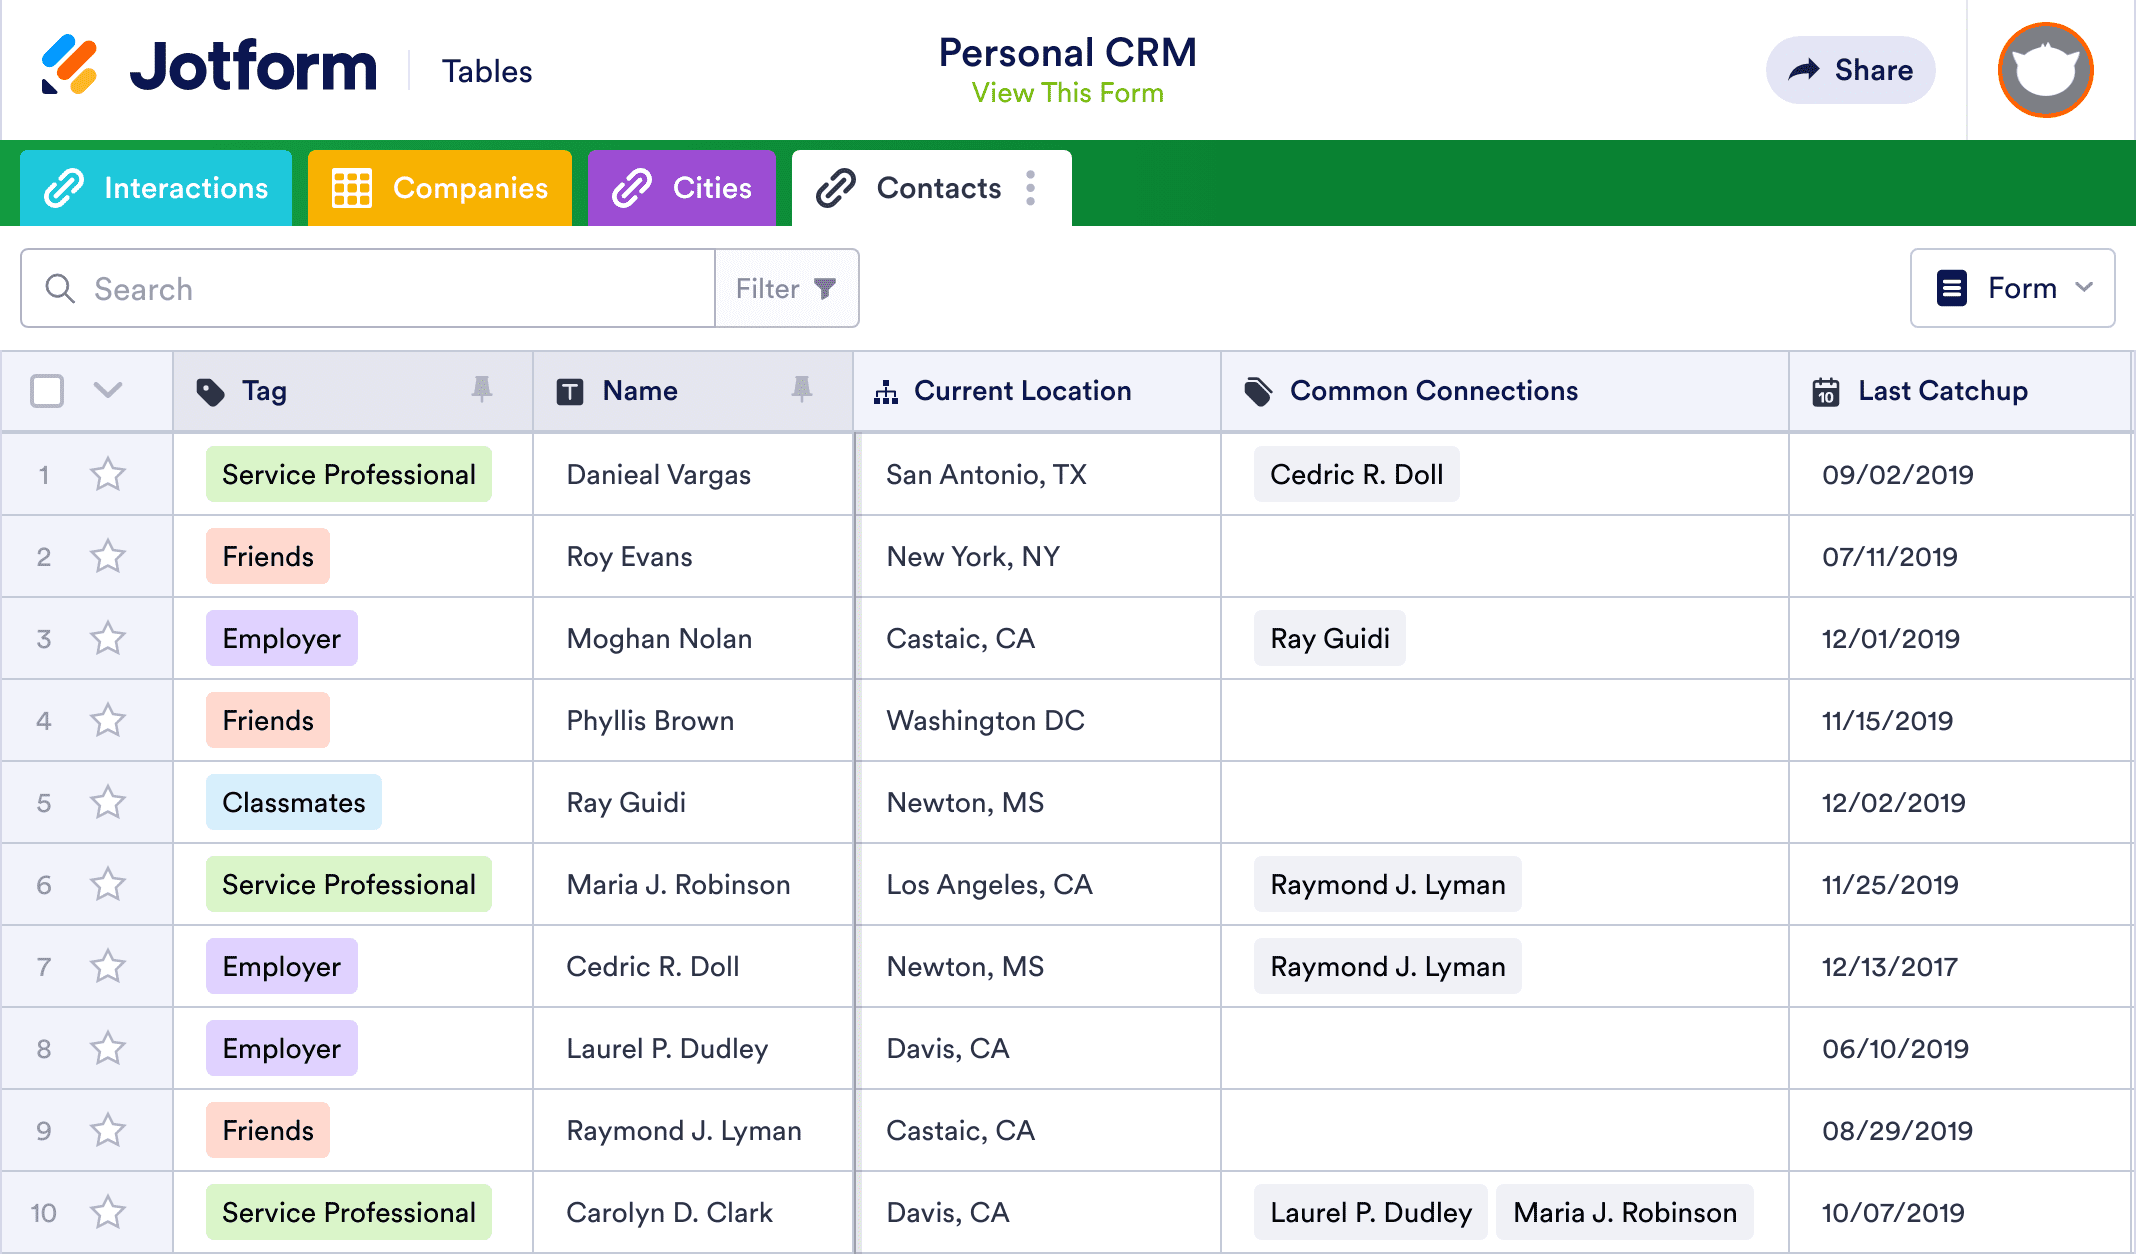 Personal CRM